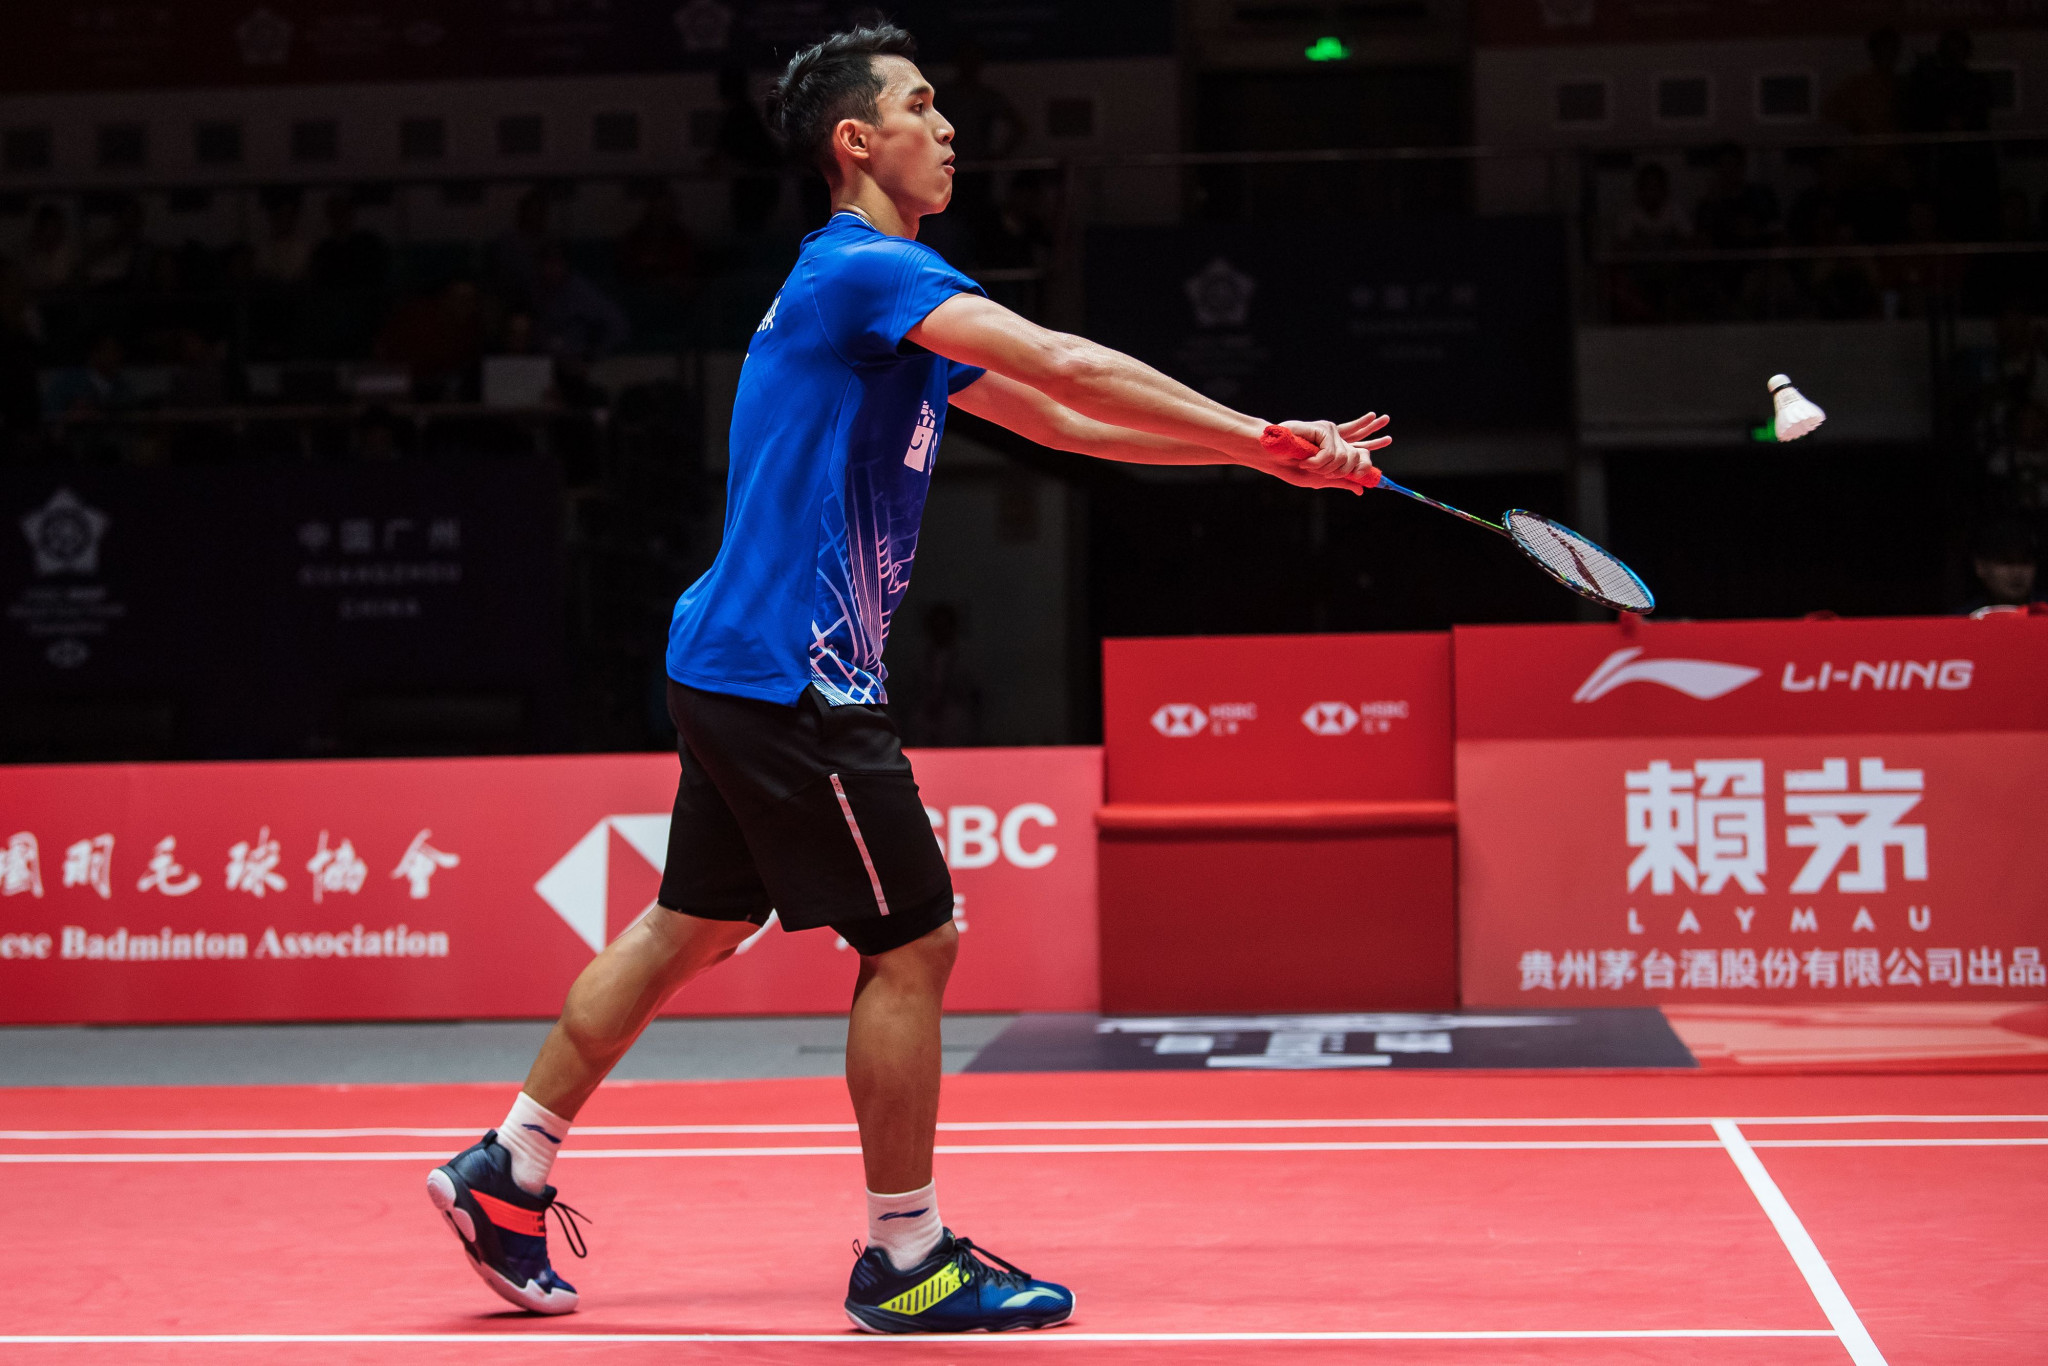 Indonesia and Japan remain on course for successful title defences at Badminton Asia Team Championships